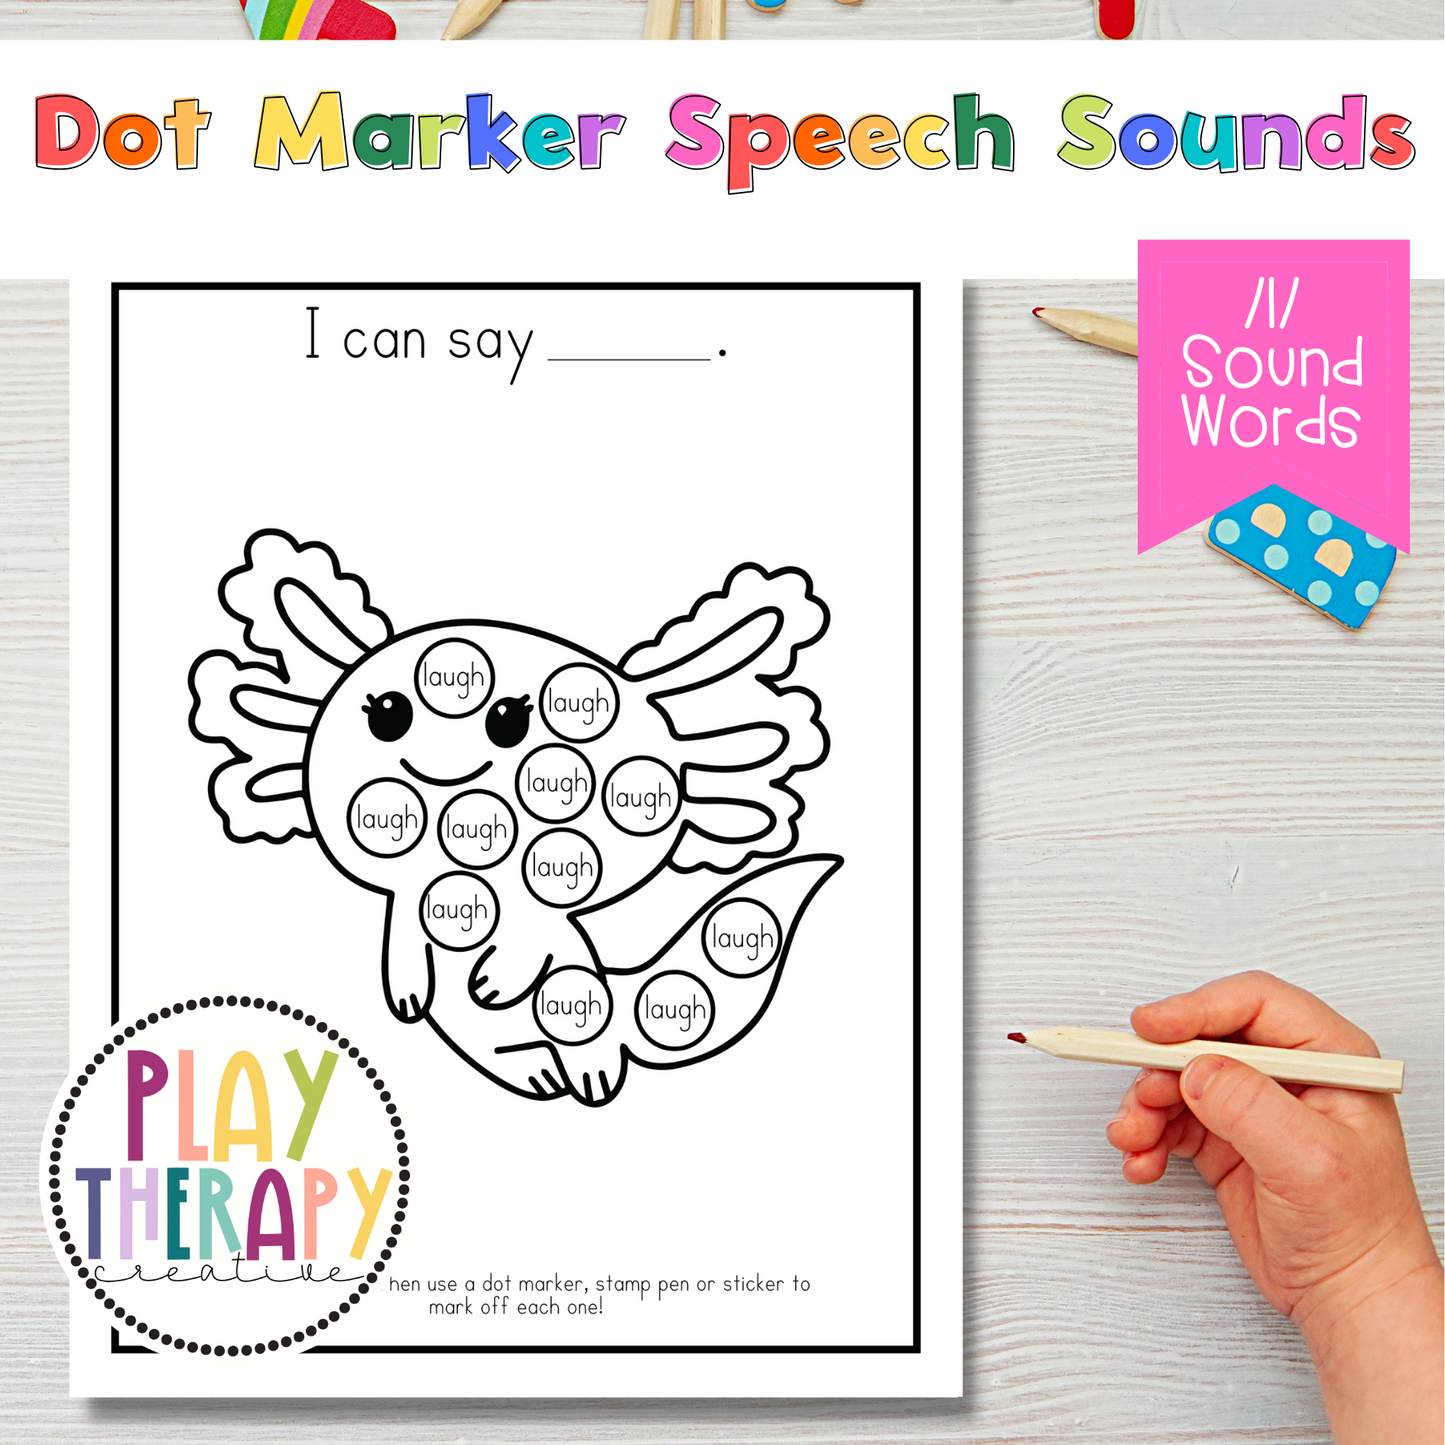 Dot Marker Speech Sound Practice Coloring Pages | /l/ Sound Words